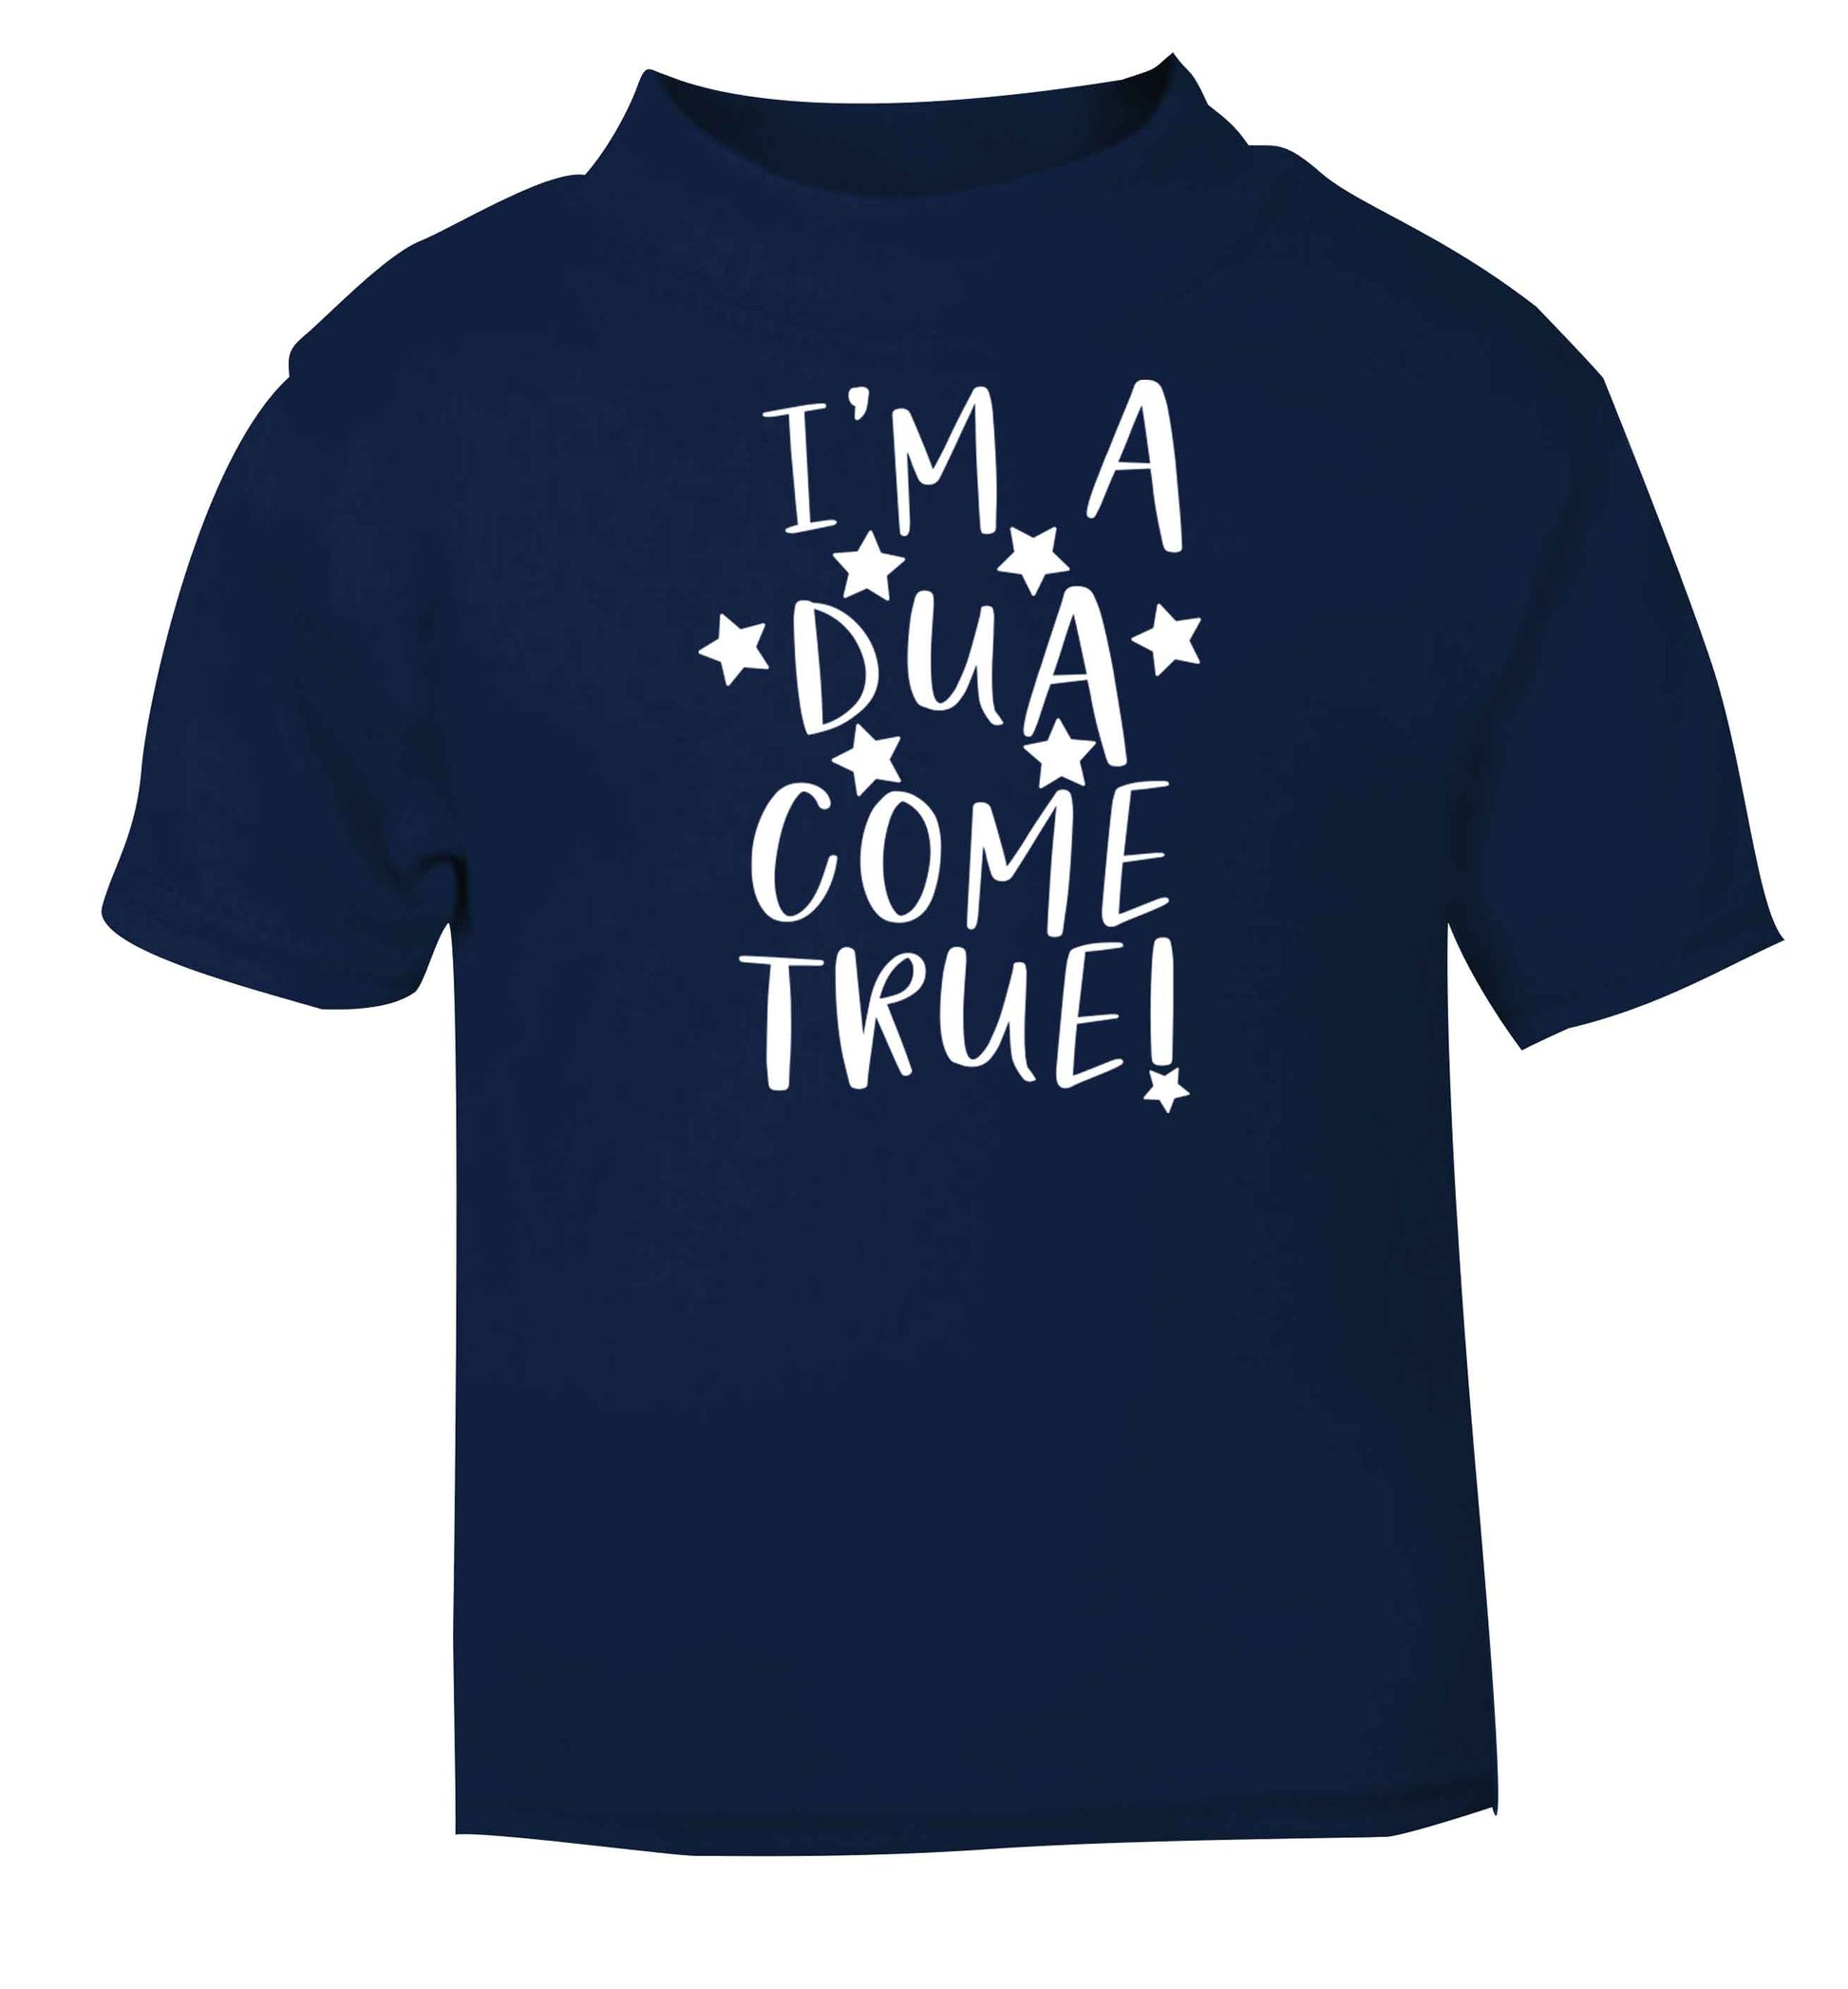 I'm a dua come true navy baby toddler Tshirt 2 Years